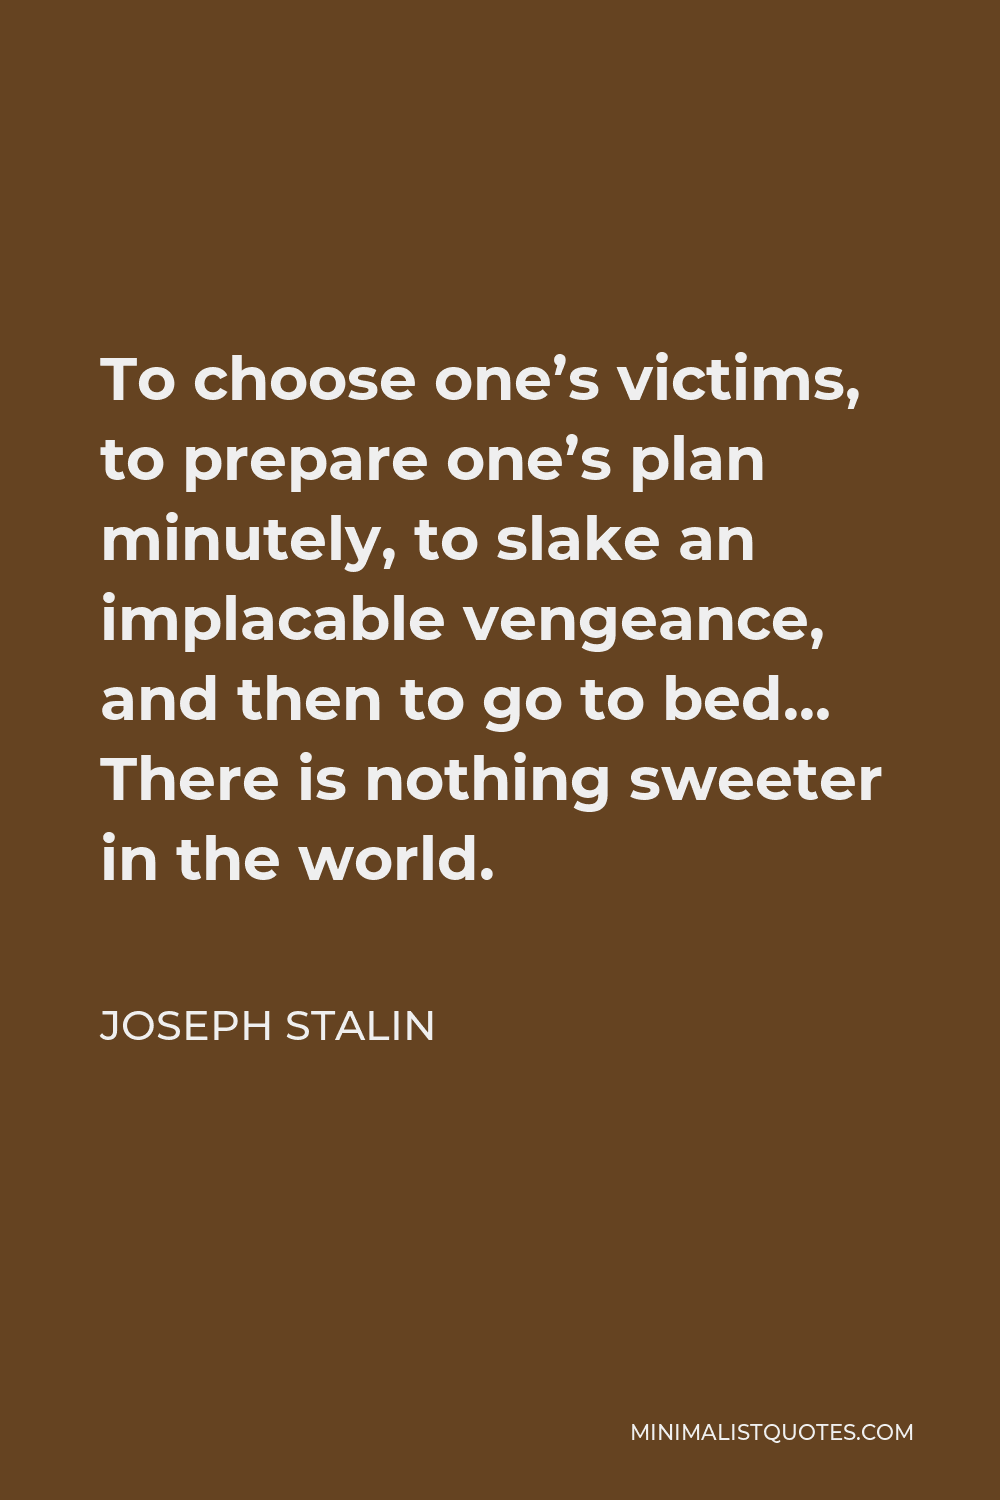 Joseph Stalin Quote - To choose one’s victims, to prepare one’s plan minutely, to slake an implacable vengeance, and then to go to bed… There is nothing sweeter in the world.